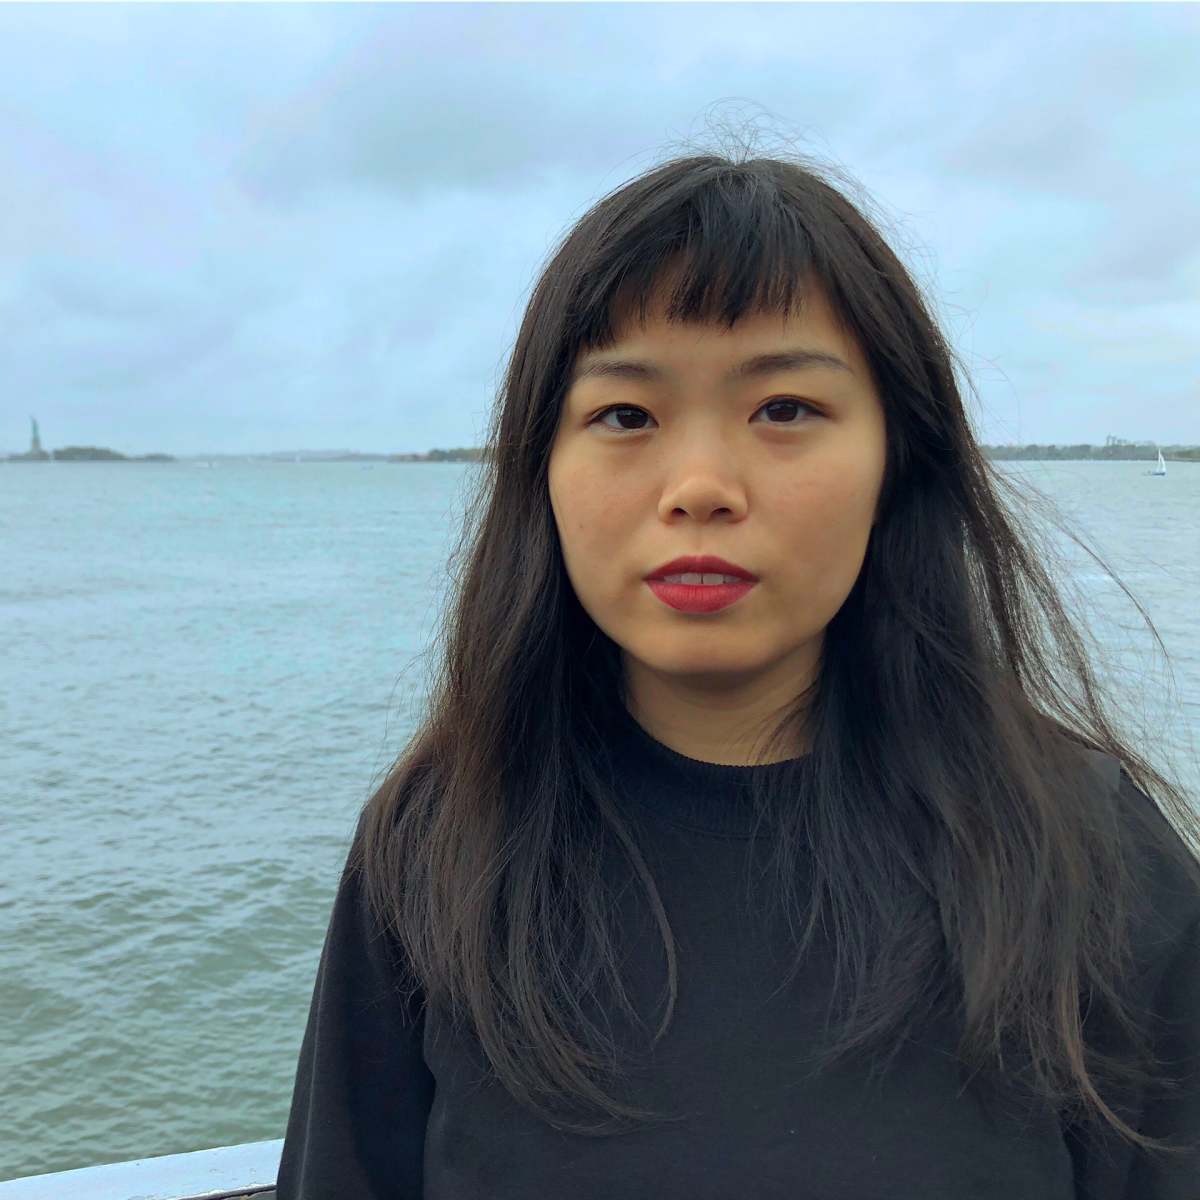 Yehui Zhao wearing a black shirt with long dark hair, bangs, and redish lipstick. A body of water and a clouds are in the back ground.